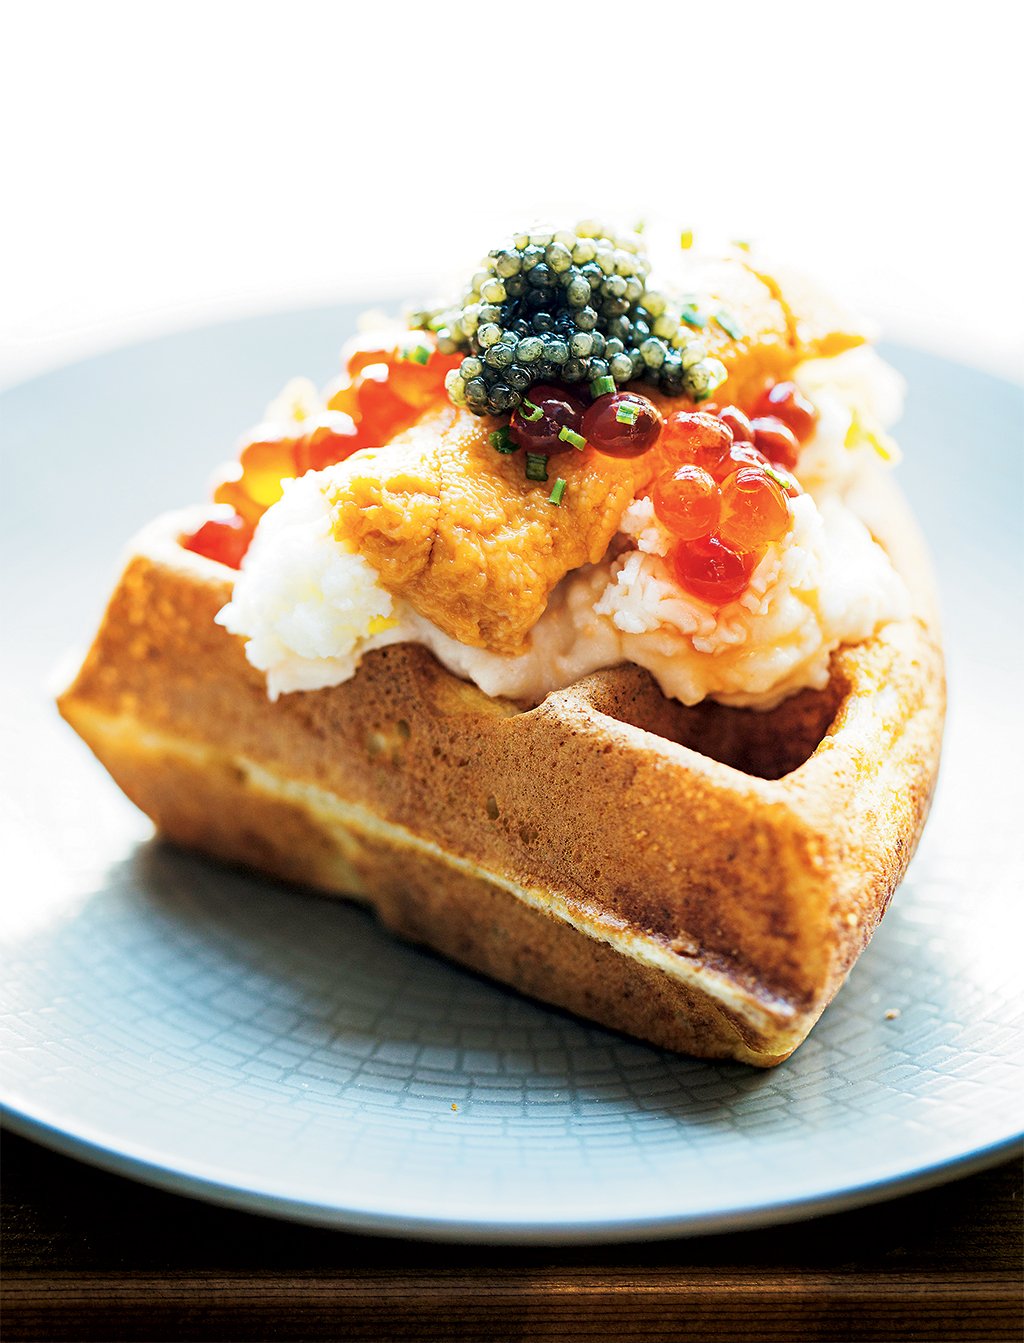 Cheap Restaurants in Arlington. Jonah Kim brings a fine-dining background to Yona in Ballston. Exhibit A: his waffle laden with sea urchin and salmon roe. Photograph by Scott Suchman.